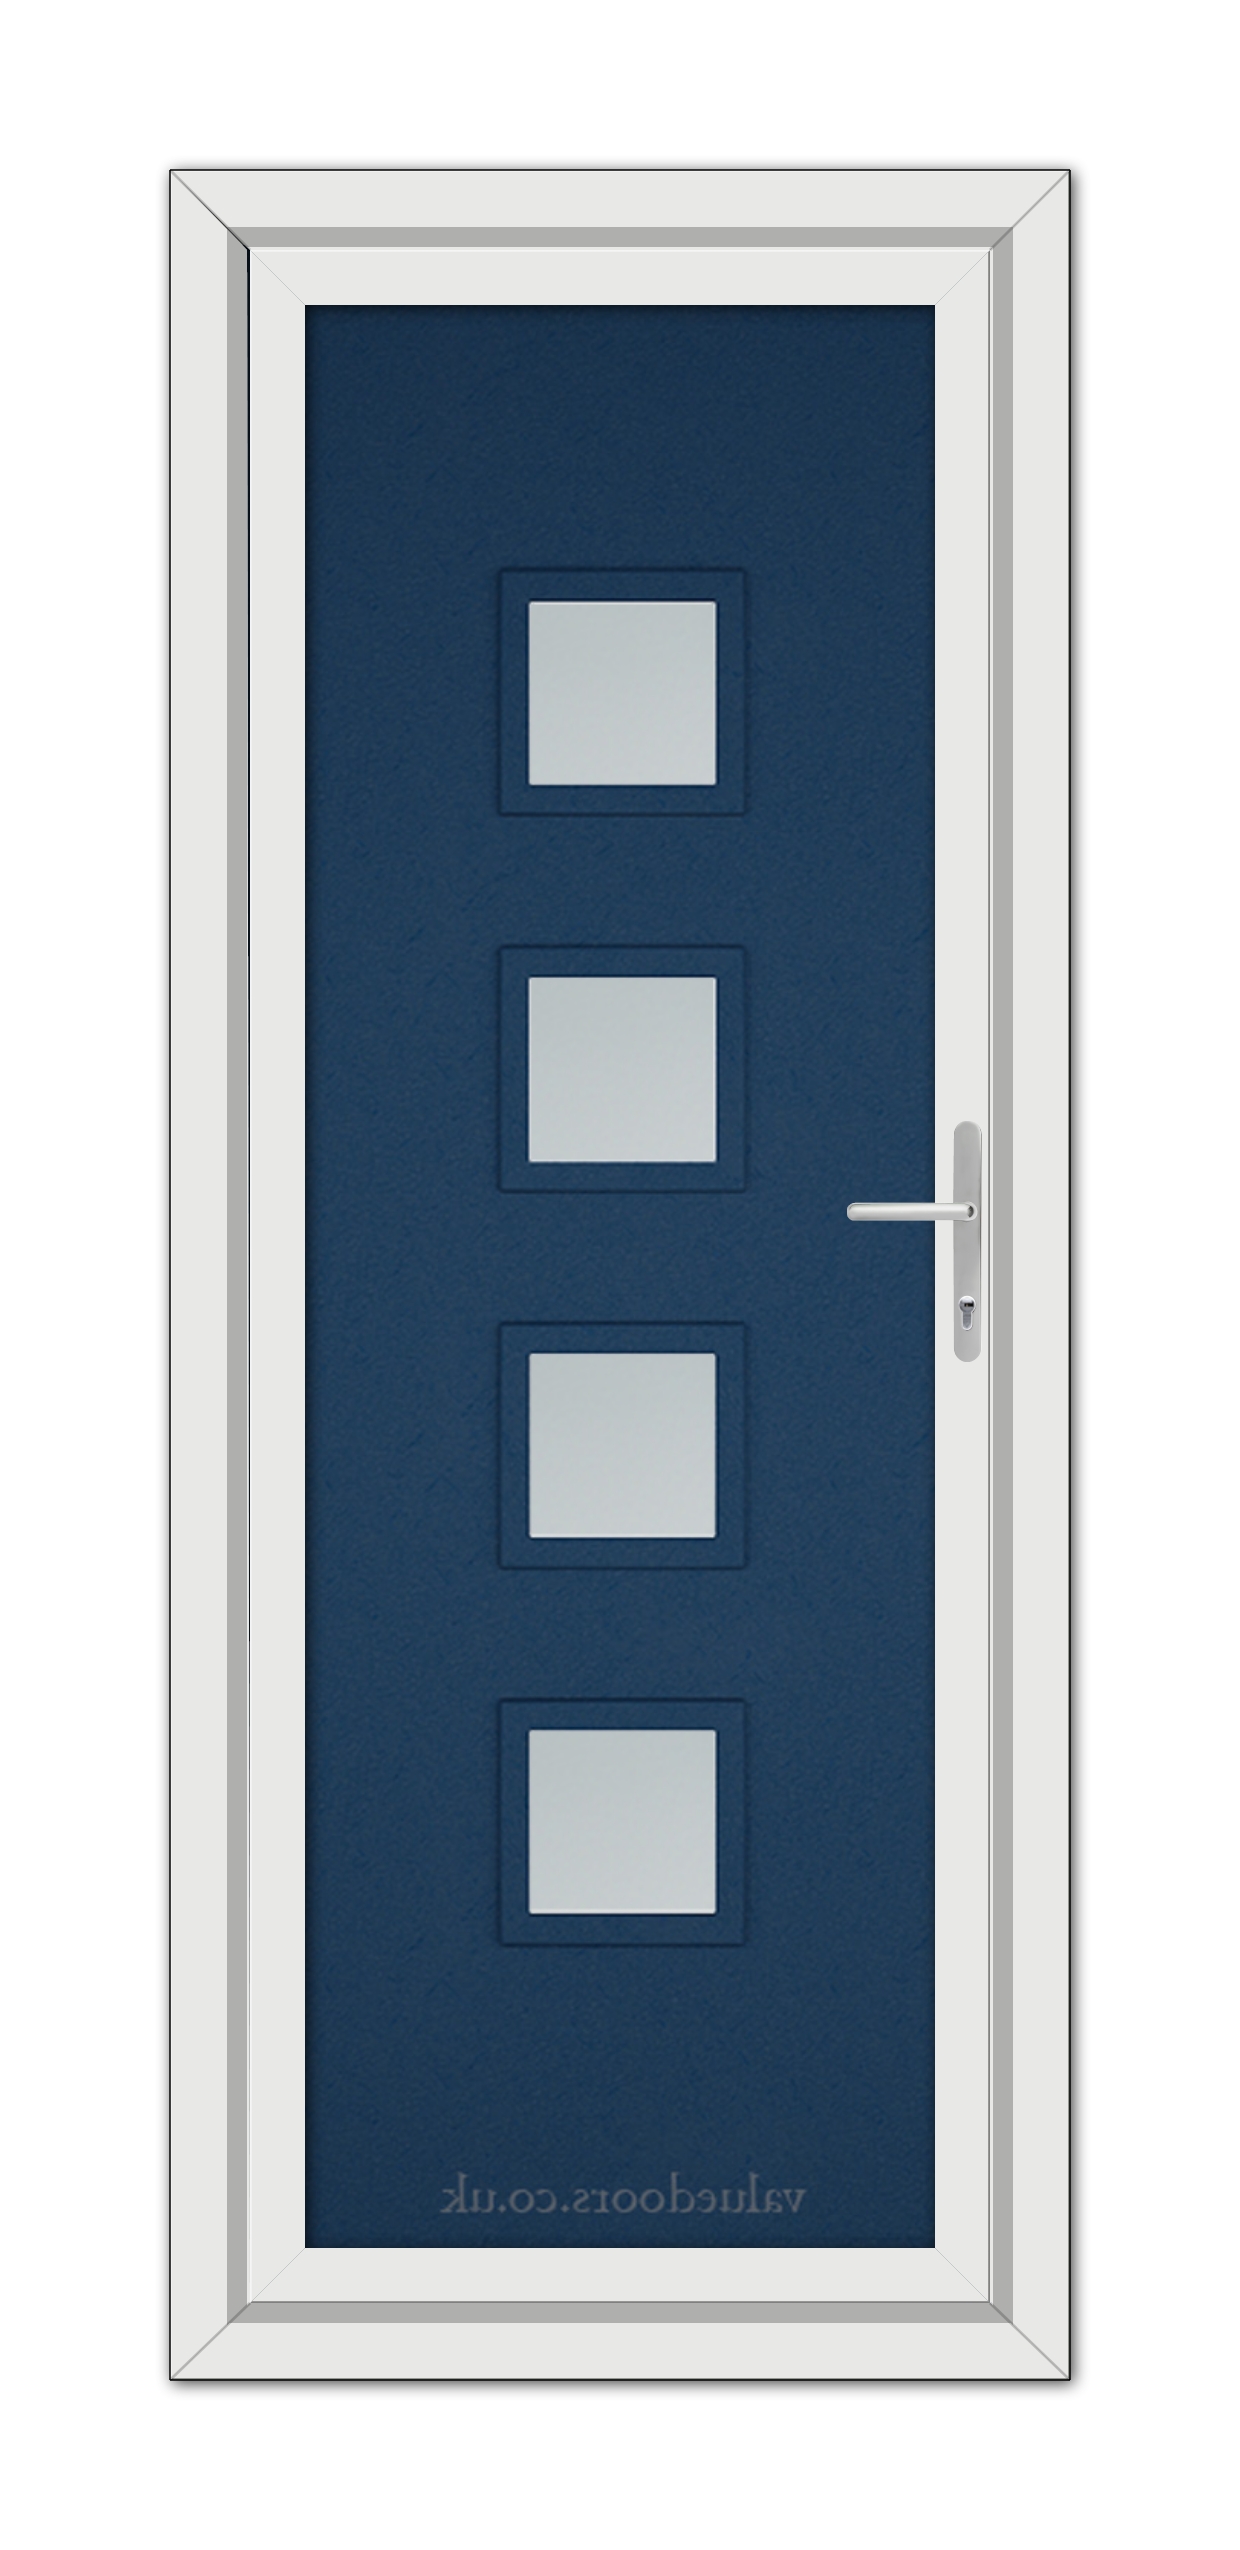 Blue Modern 5034 uPVC door with four square glass panels aligned vertically, a white frame, and a metallic handle on the right.